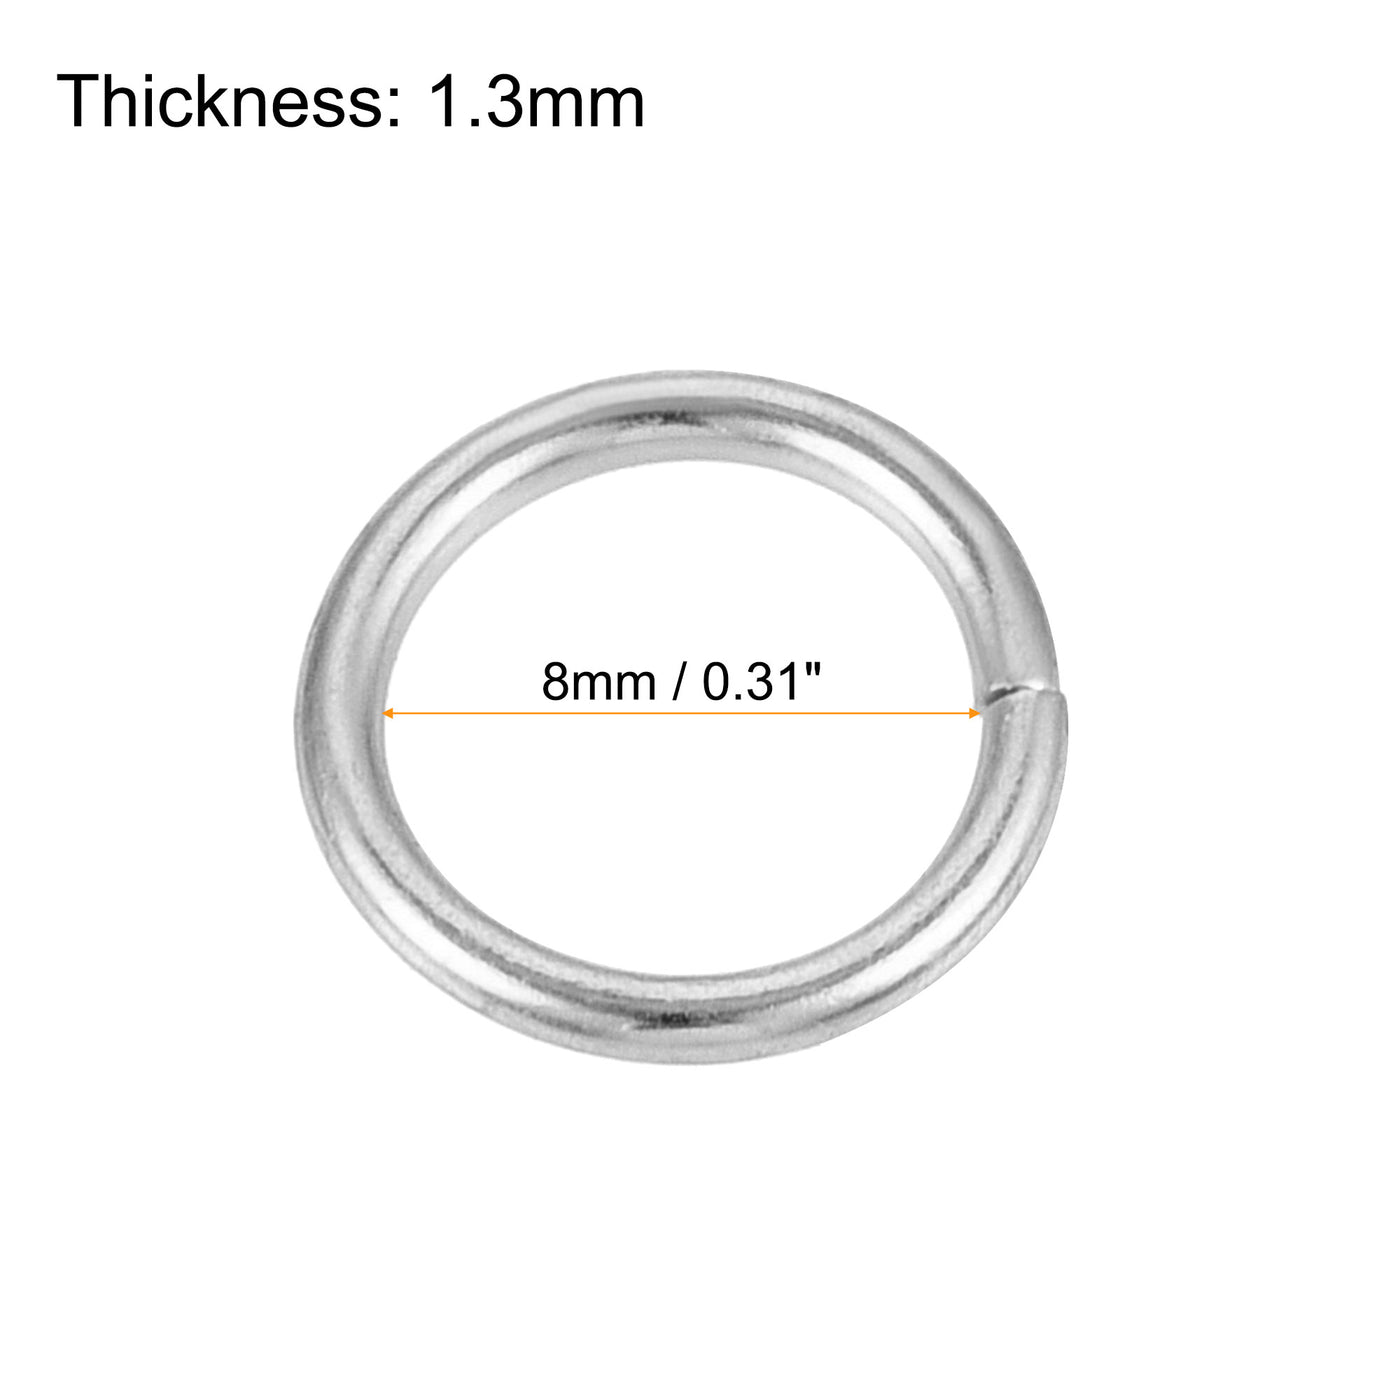 uxcell Uxcell 8mm Metal O Rings Non-Welded for Straps Bags Belts DIY Silver Tone 30pcs